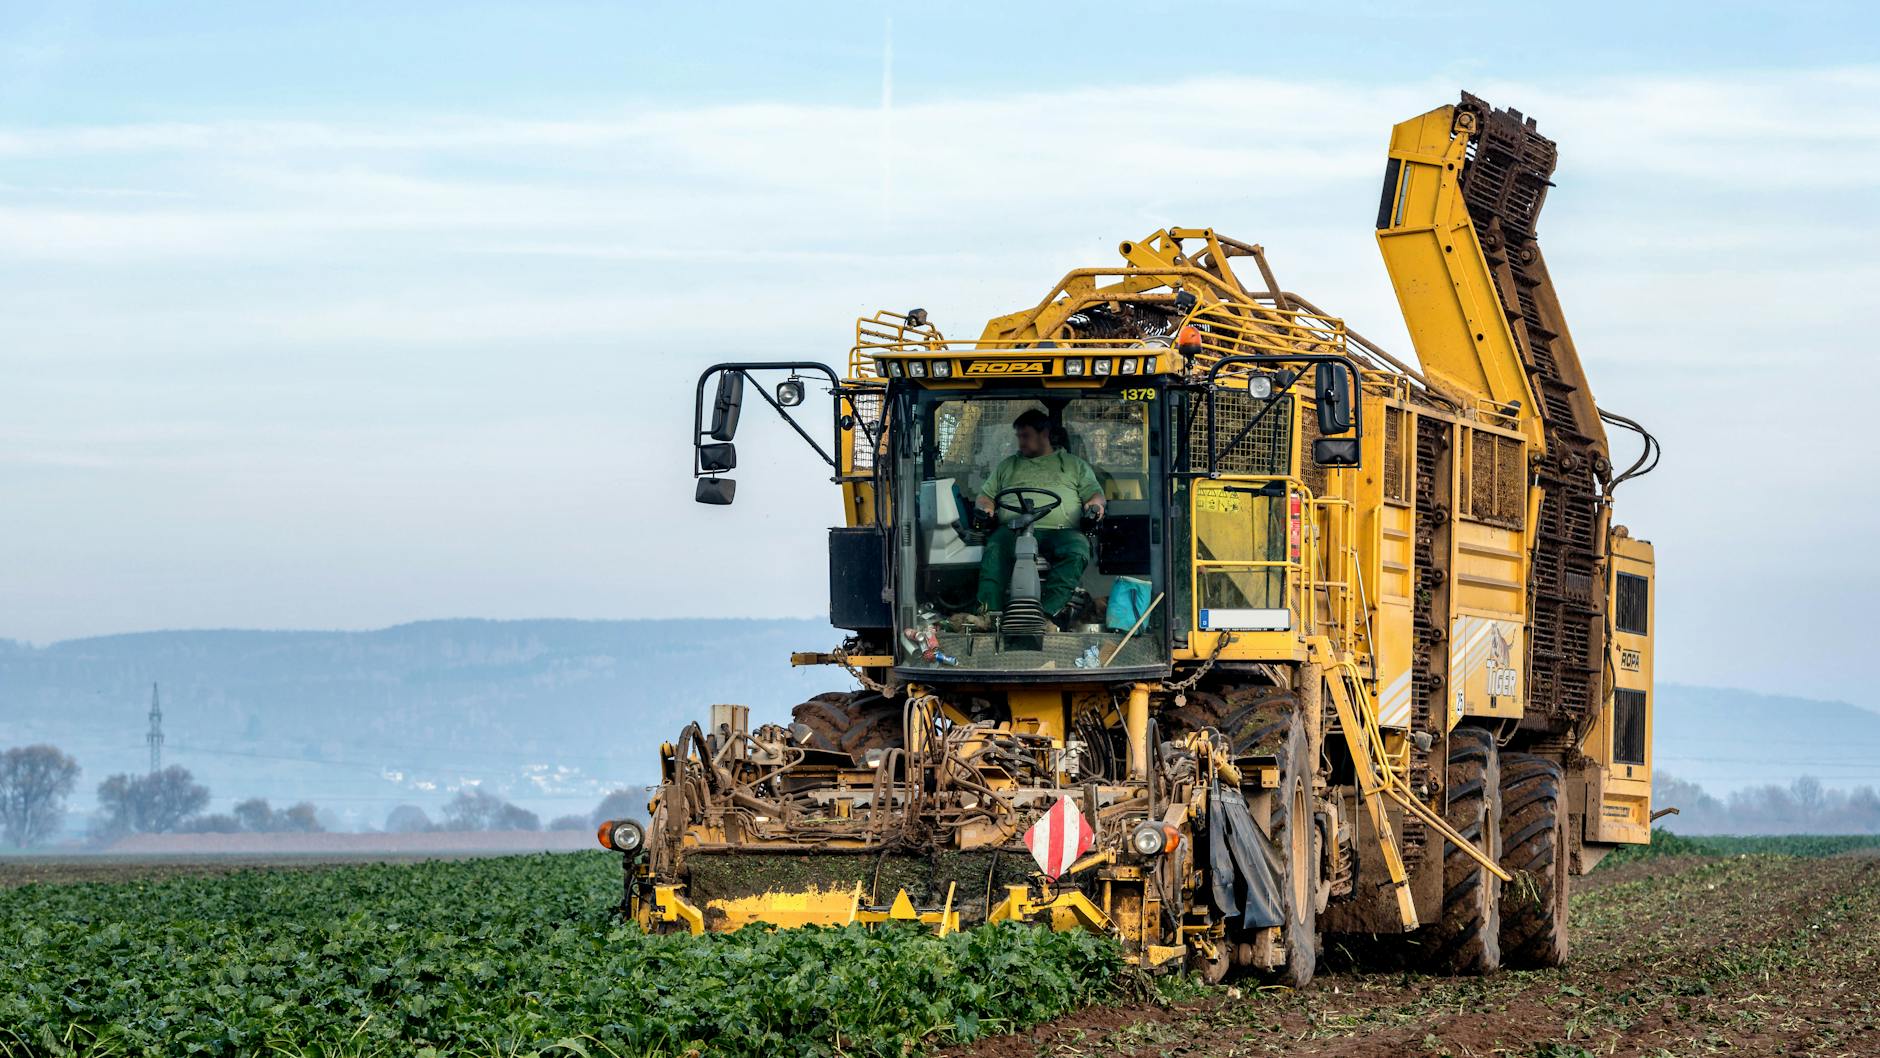 Beet Harvester on Field in Countryside